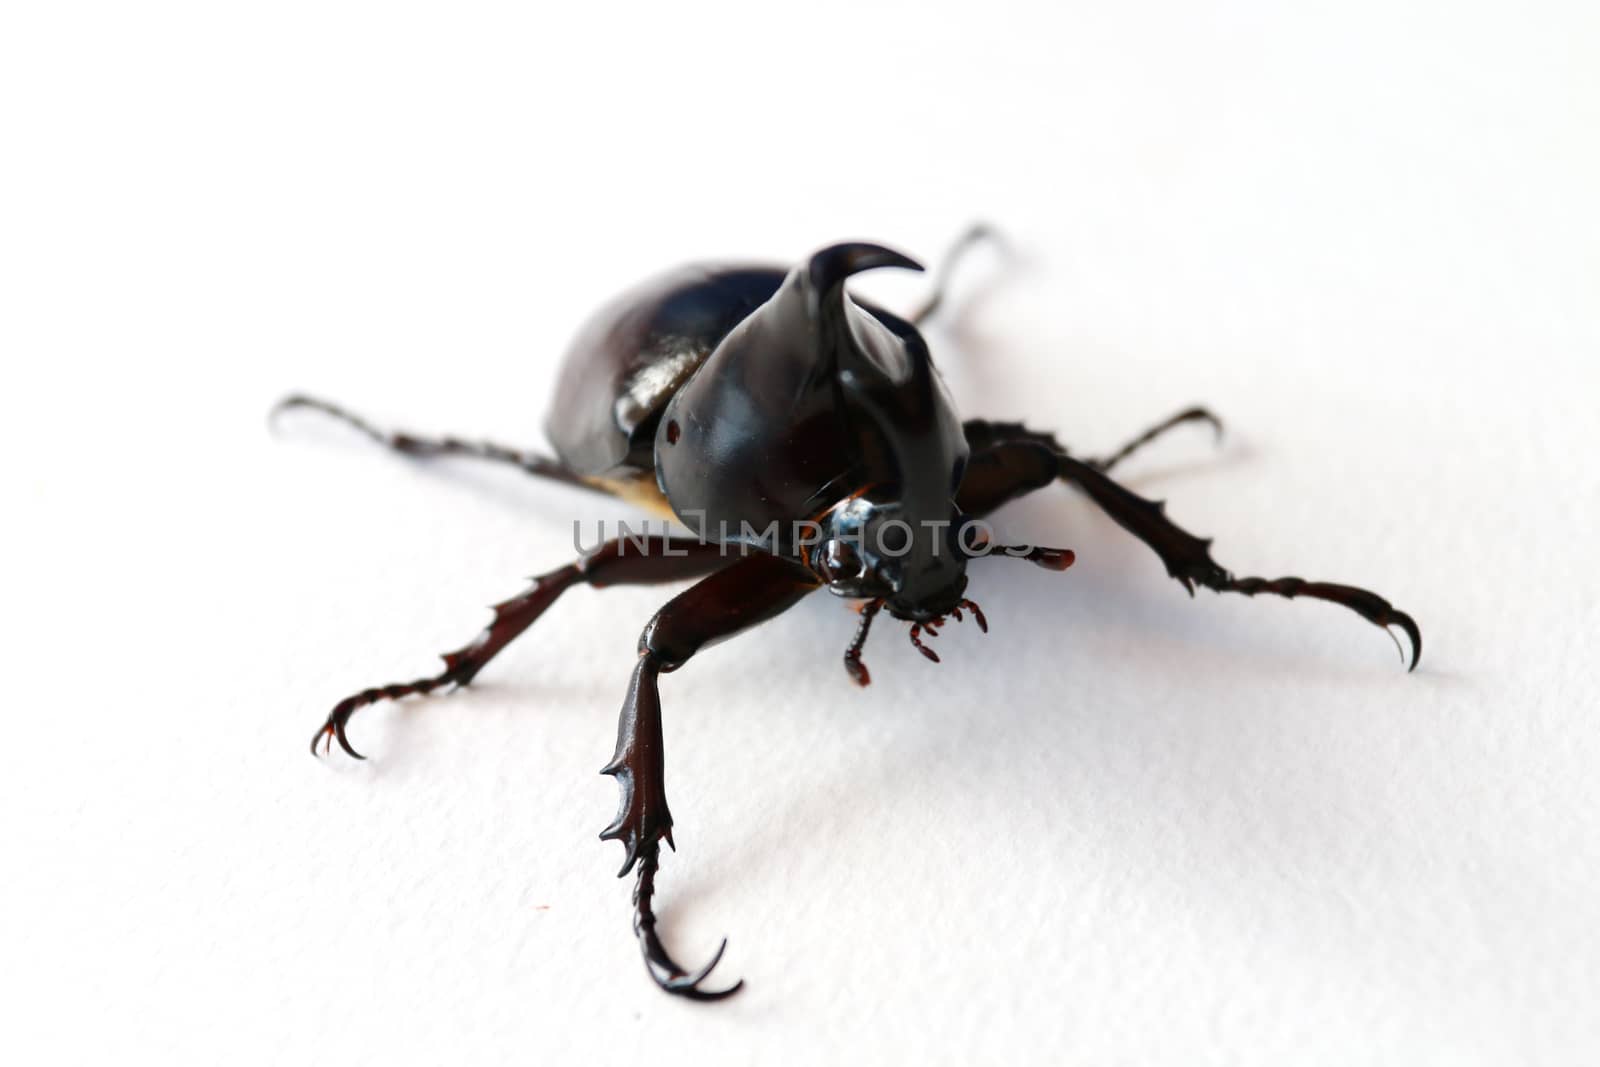 The black horn beetle on the white paper background.